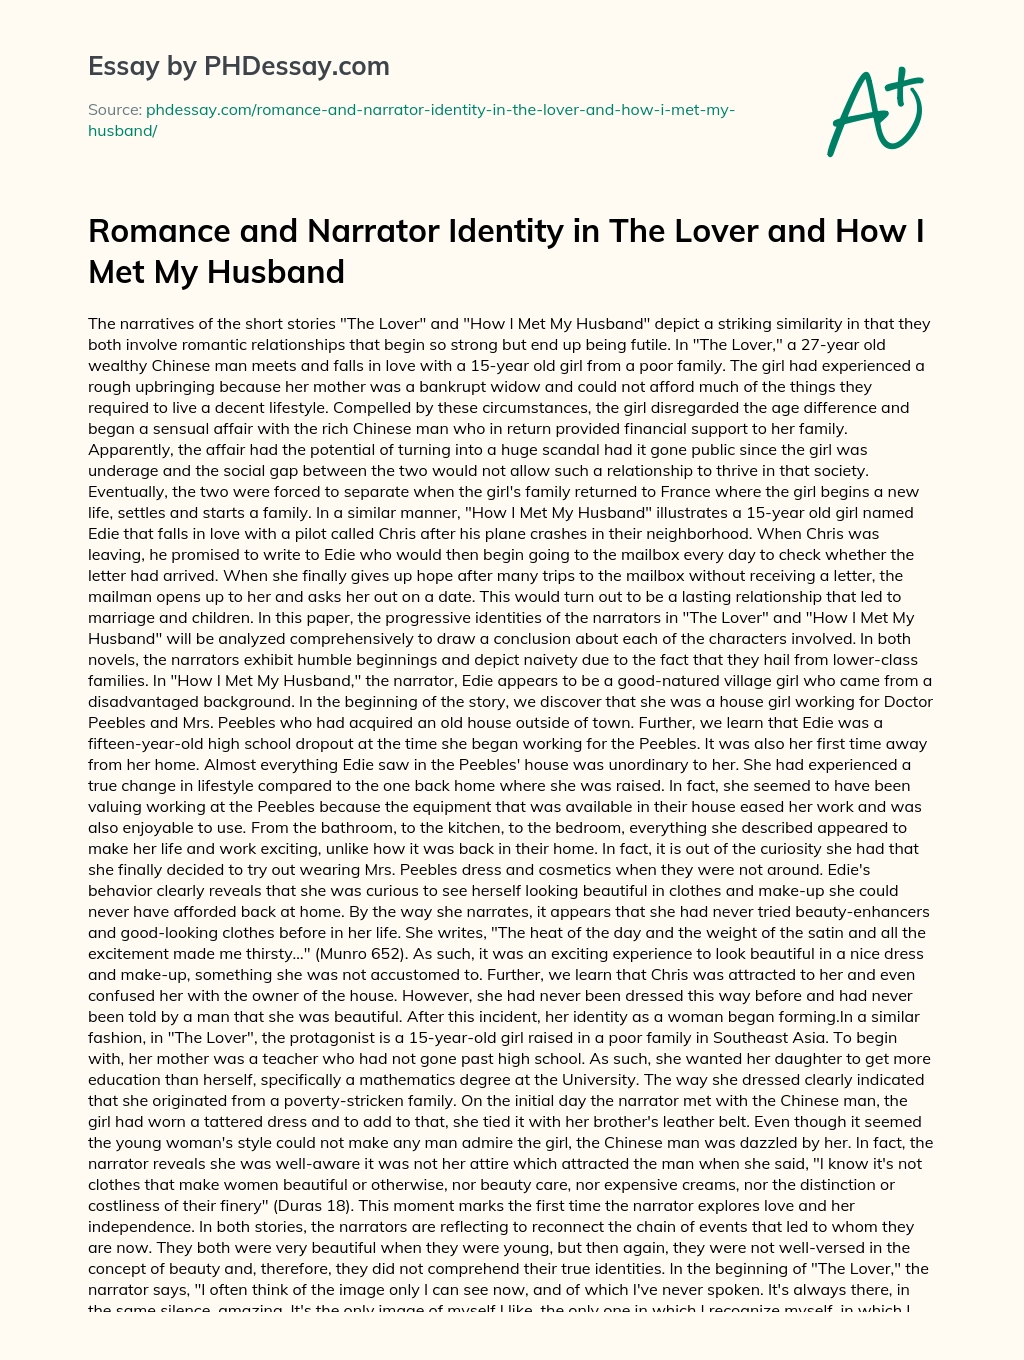 Romance and Narrator Identity in The Lover and How I Met My Husband essay